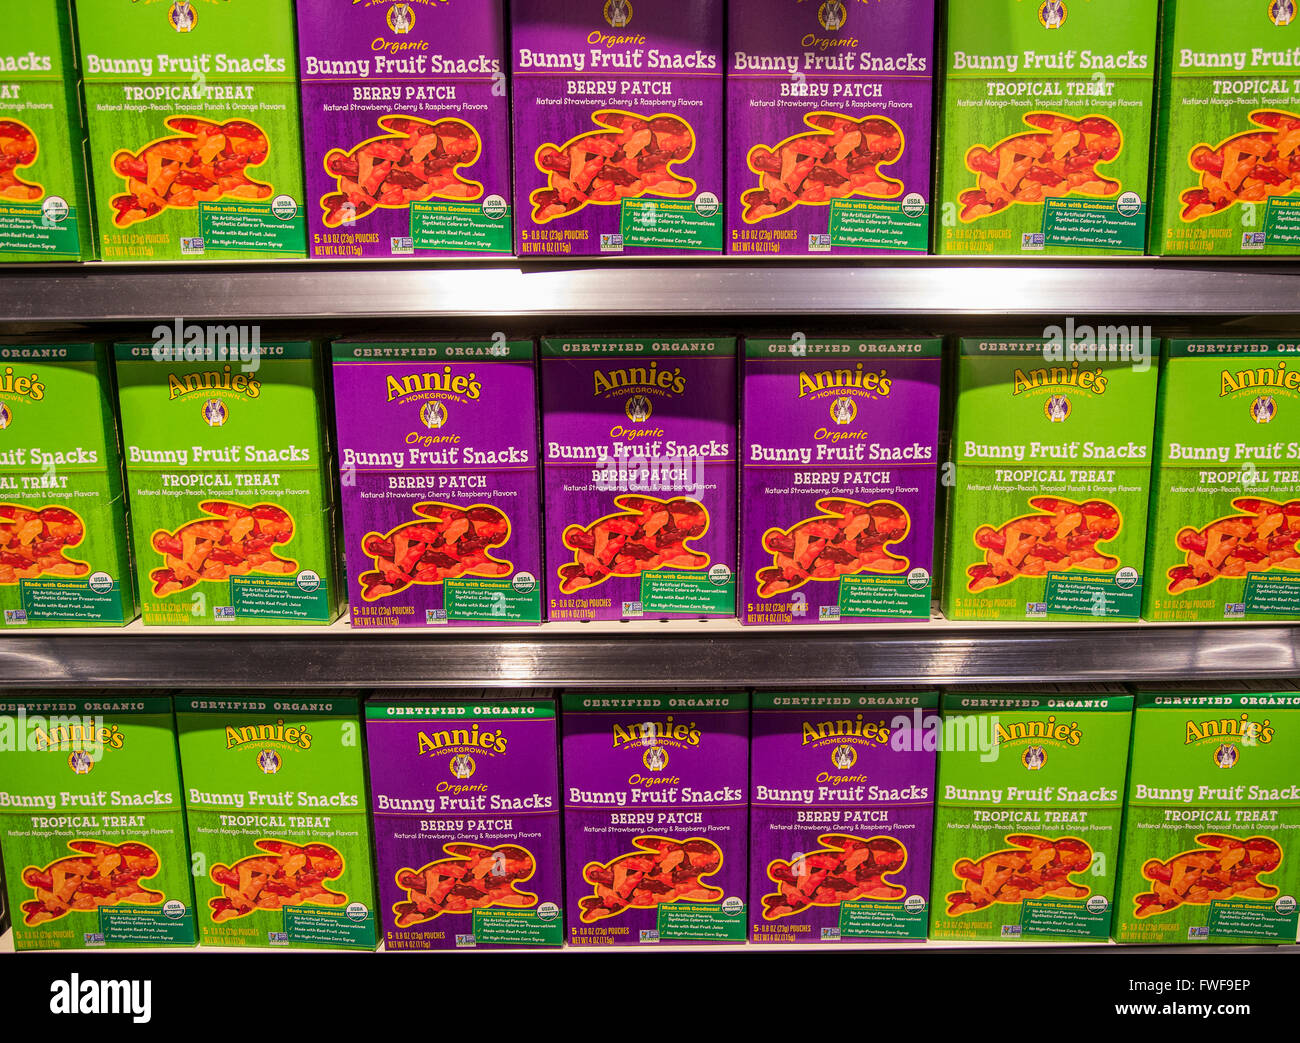 Annie's Organic fruit snacks on grocery store shelves Stock Photo